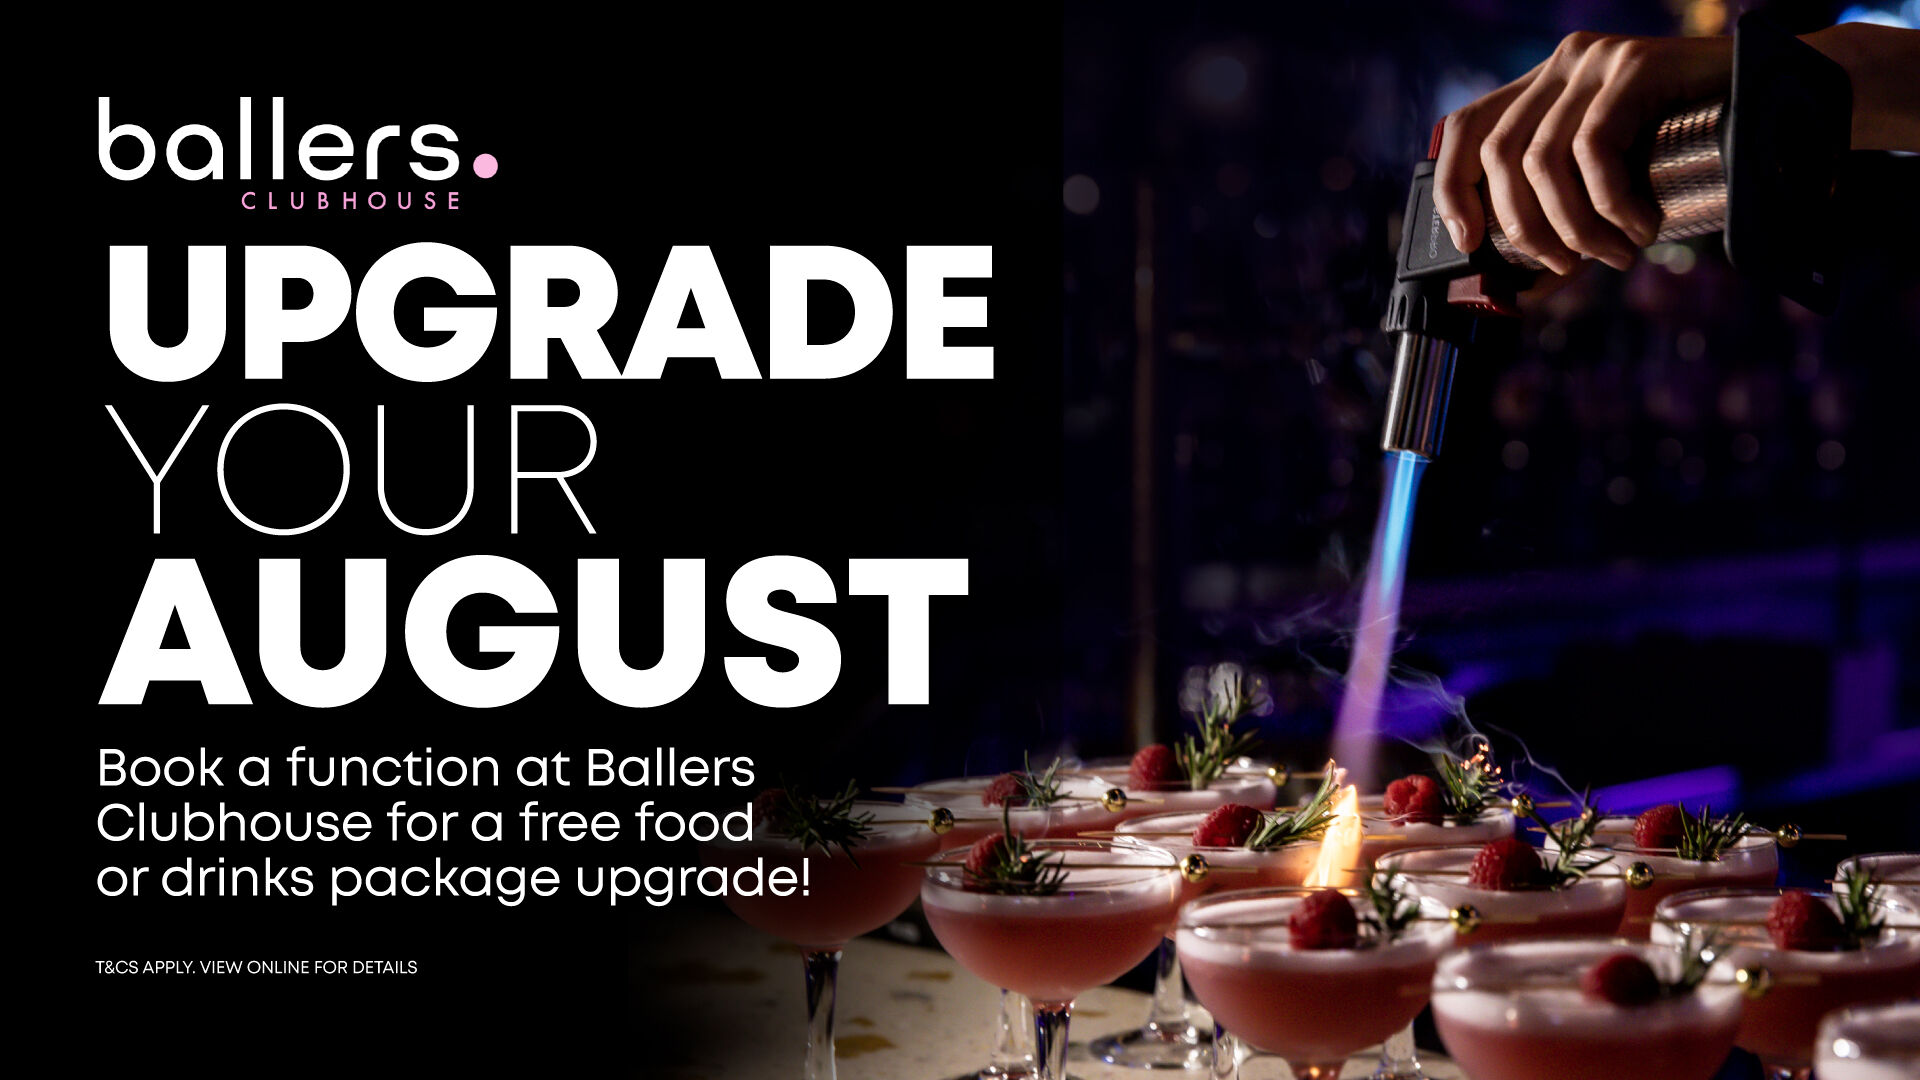 Free package upgrade | Book your function and upgrade your food & drinks package for free! | Ballers Clubhouse